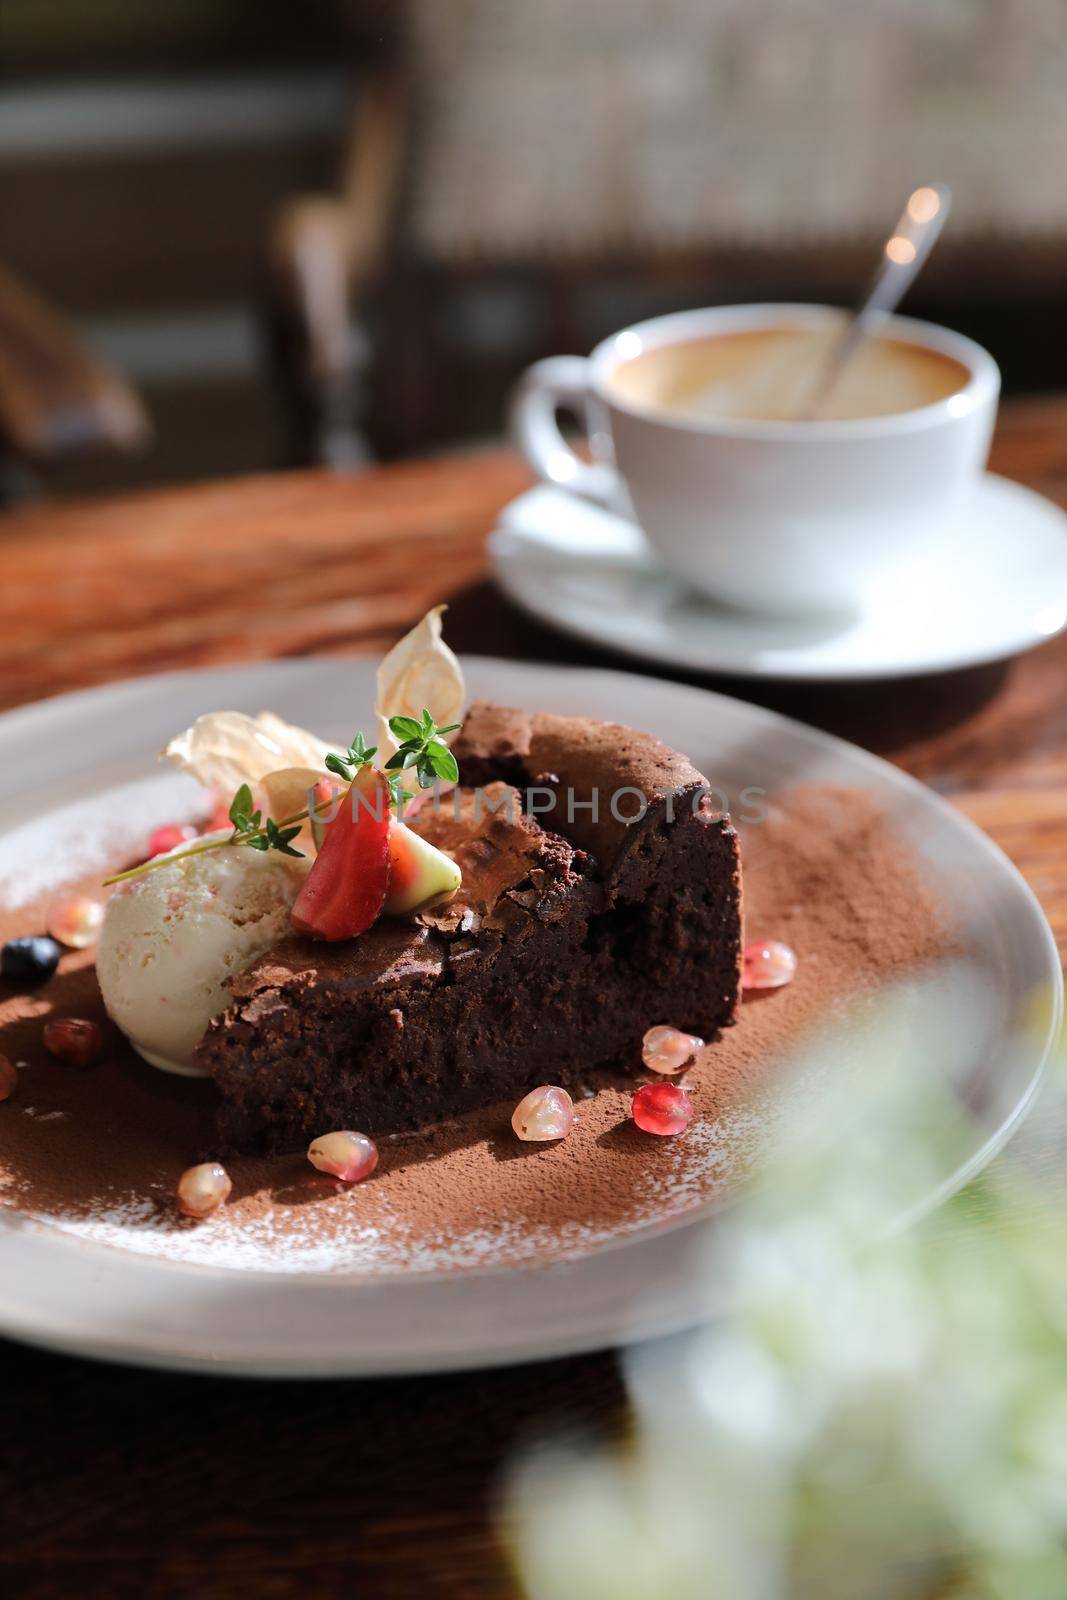 Chocolate cake with ice cream and coffee dessert on wood table  by piyato